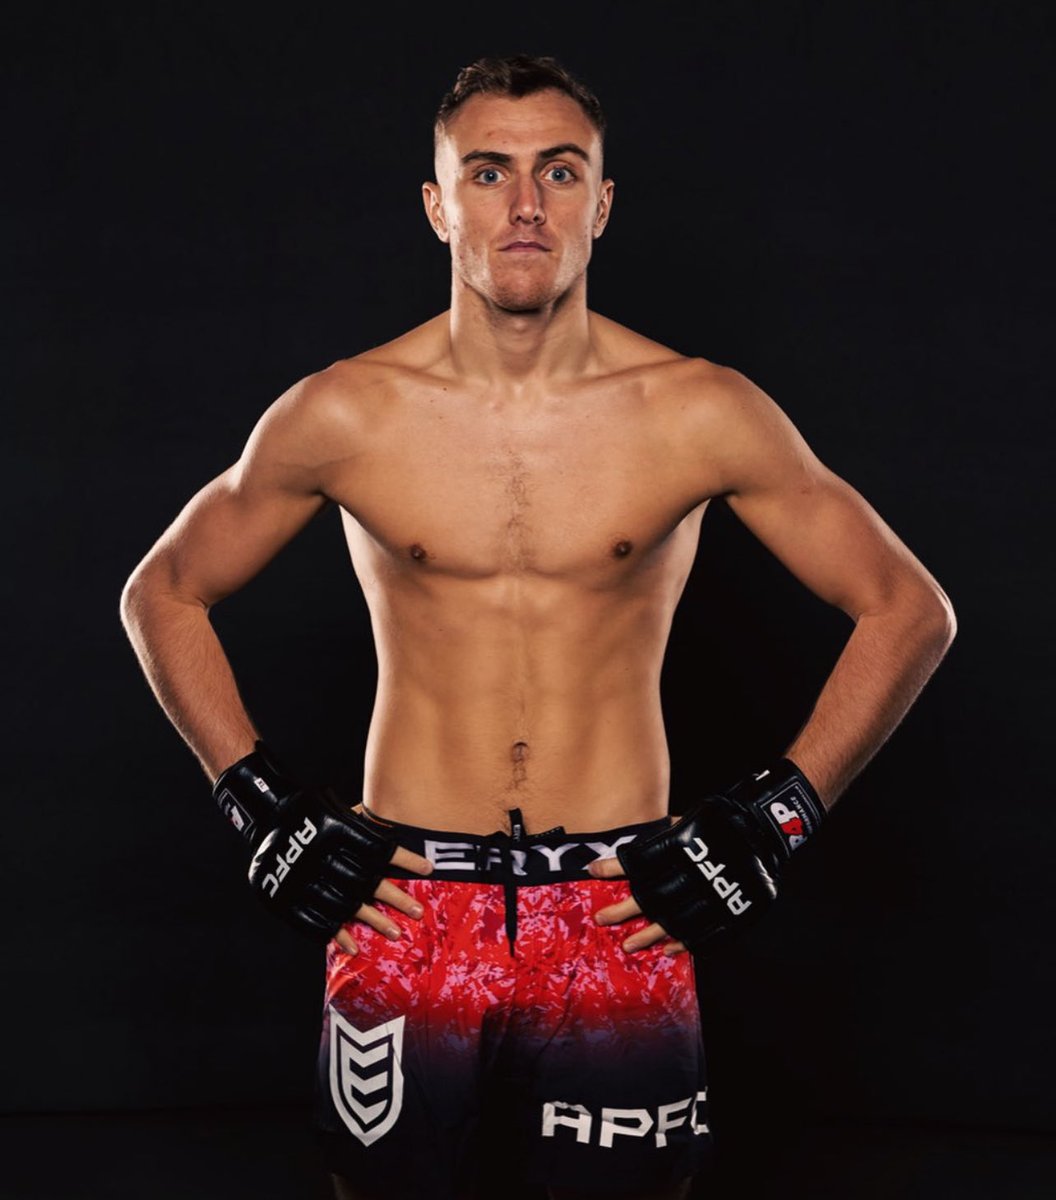 The #1 amateur MMA prospect in Europe makes his pro debut today. Get familiar with Keith Keogh.